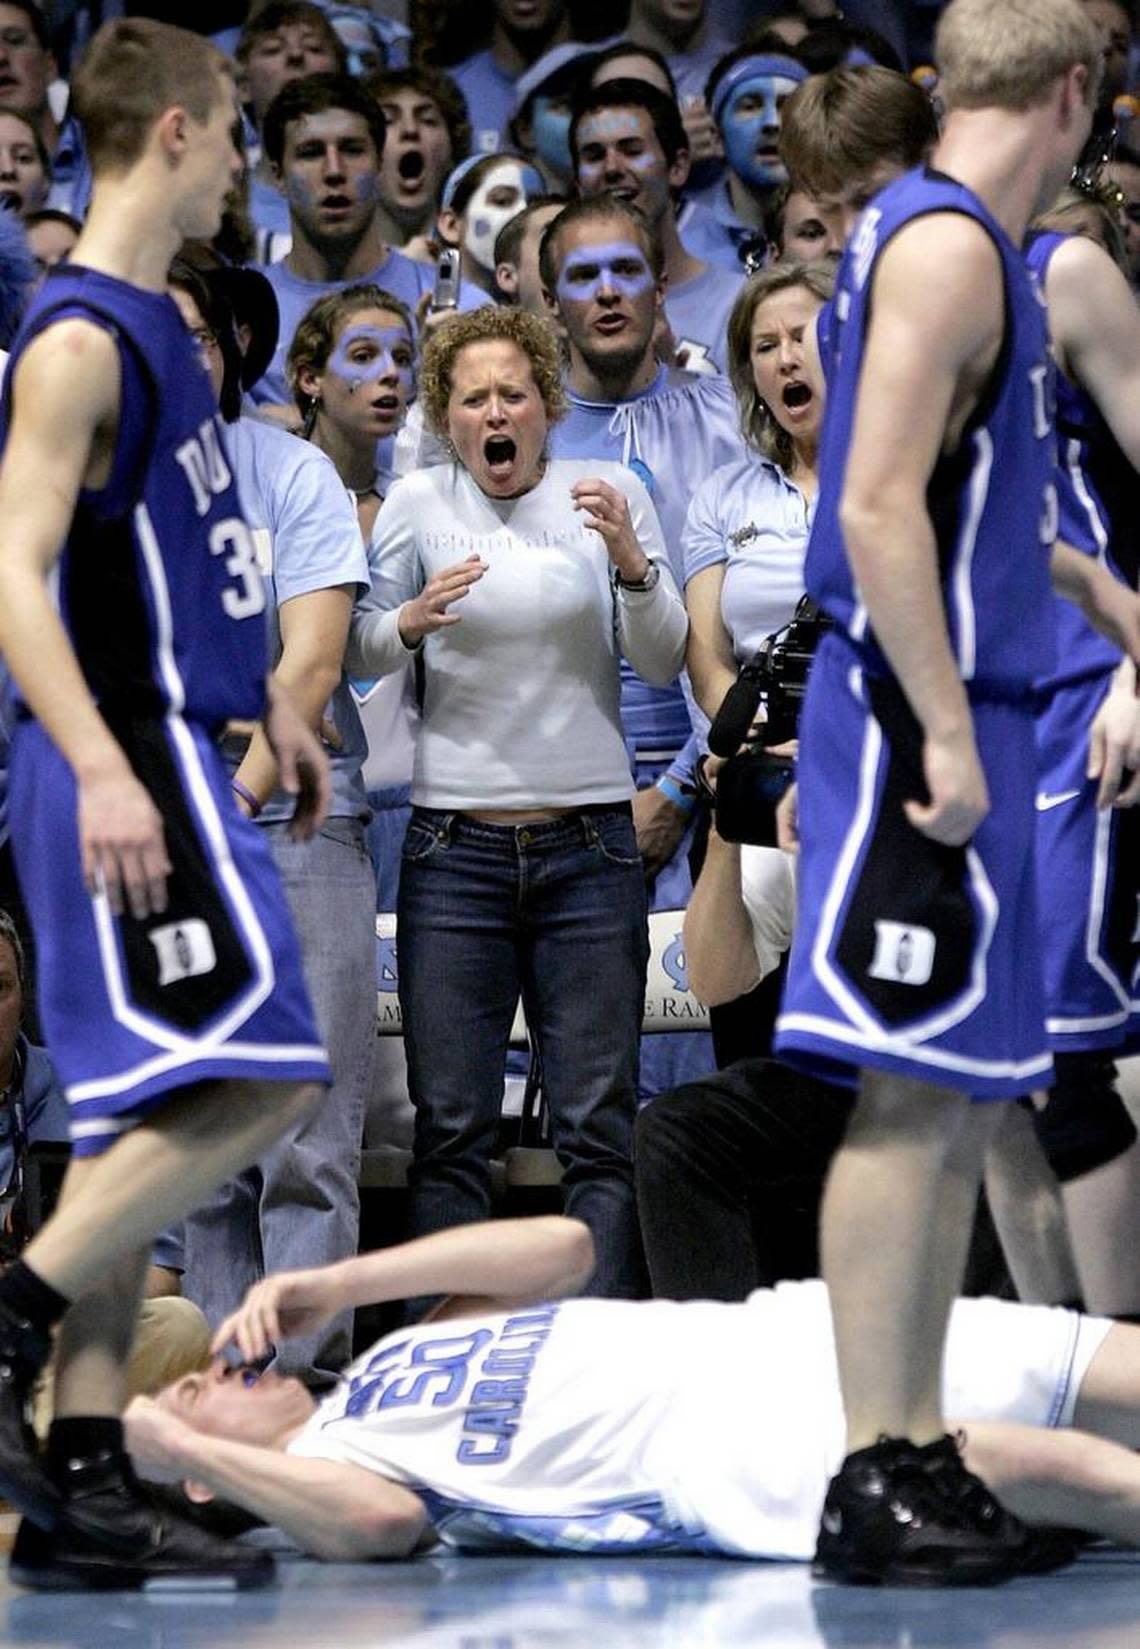 UNC fans react after a flagrant foul by Duke’s Gerald Henderson (not pictured) knocked down UNC’s Tyler Hansbrough late during UNC’s 86-72 win over Duke on March 4, 2007.